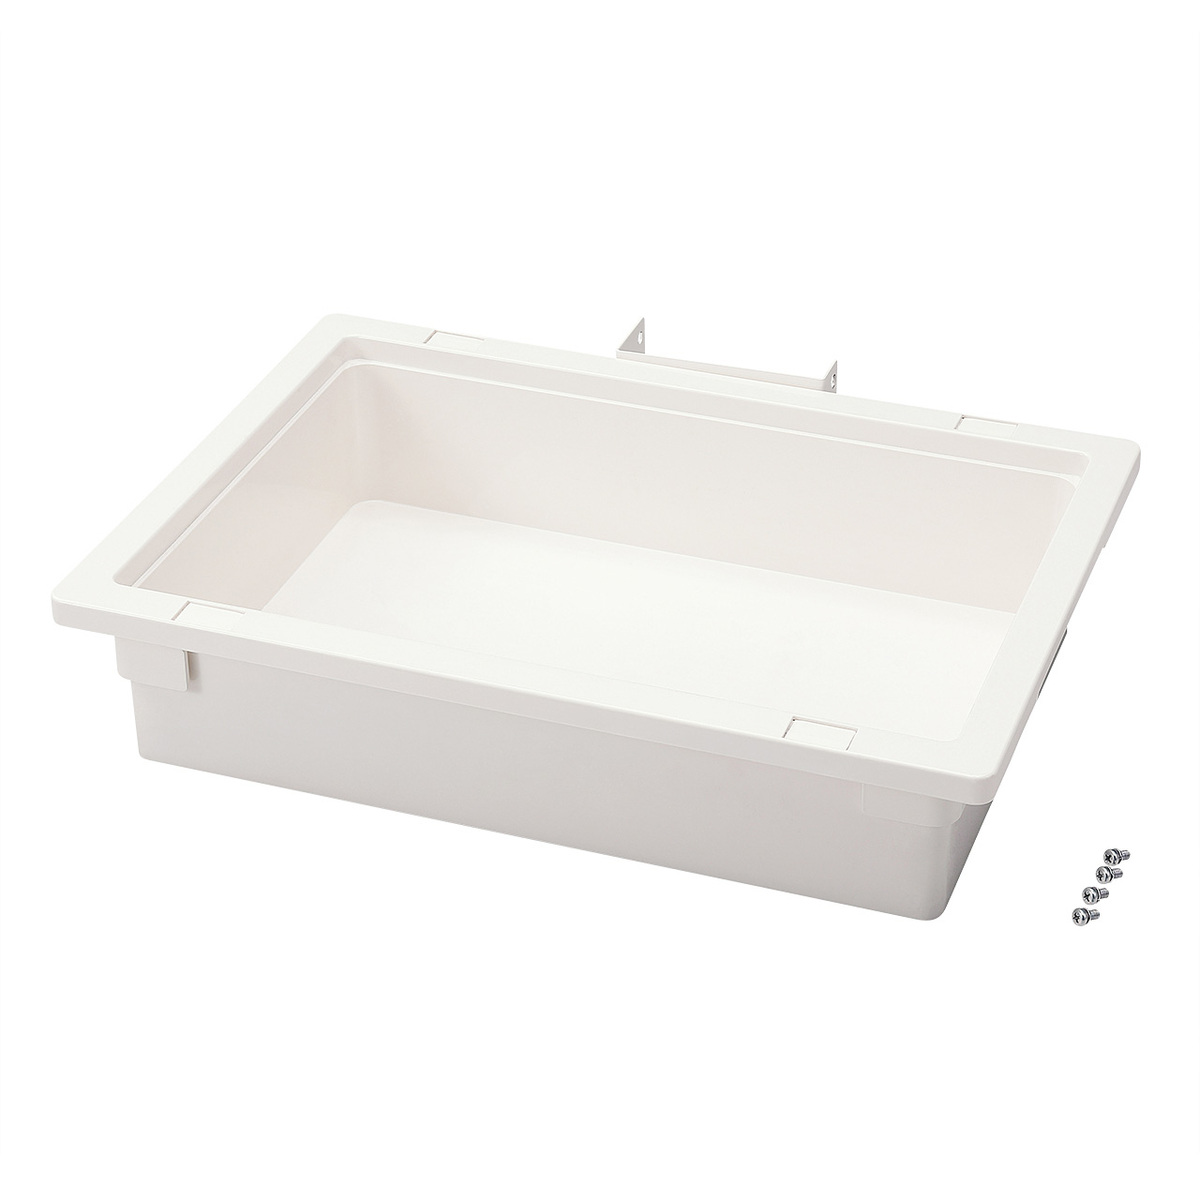 Plastic tray for multi cart